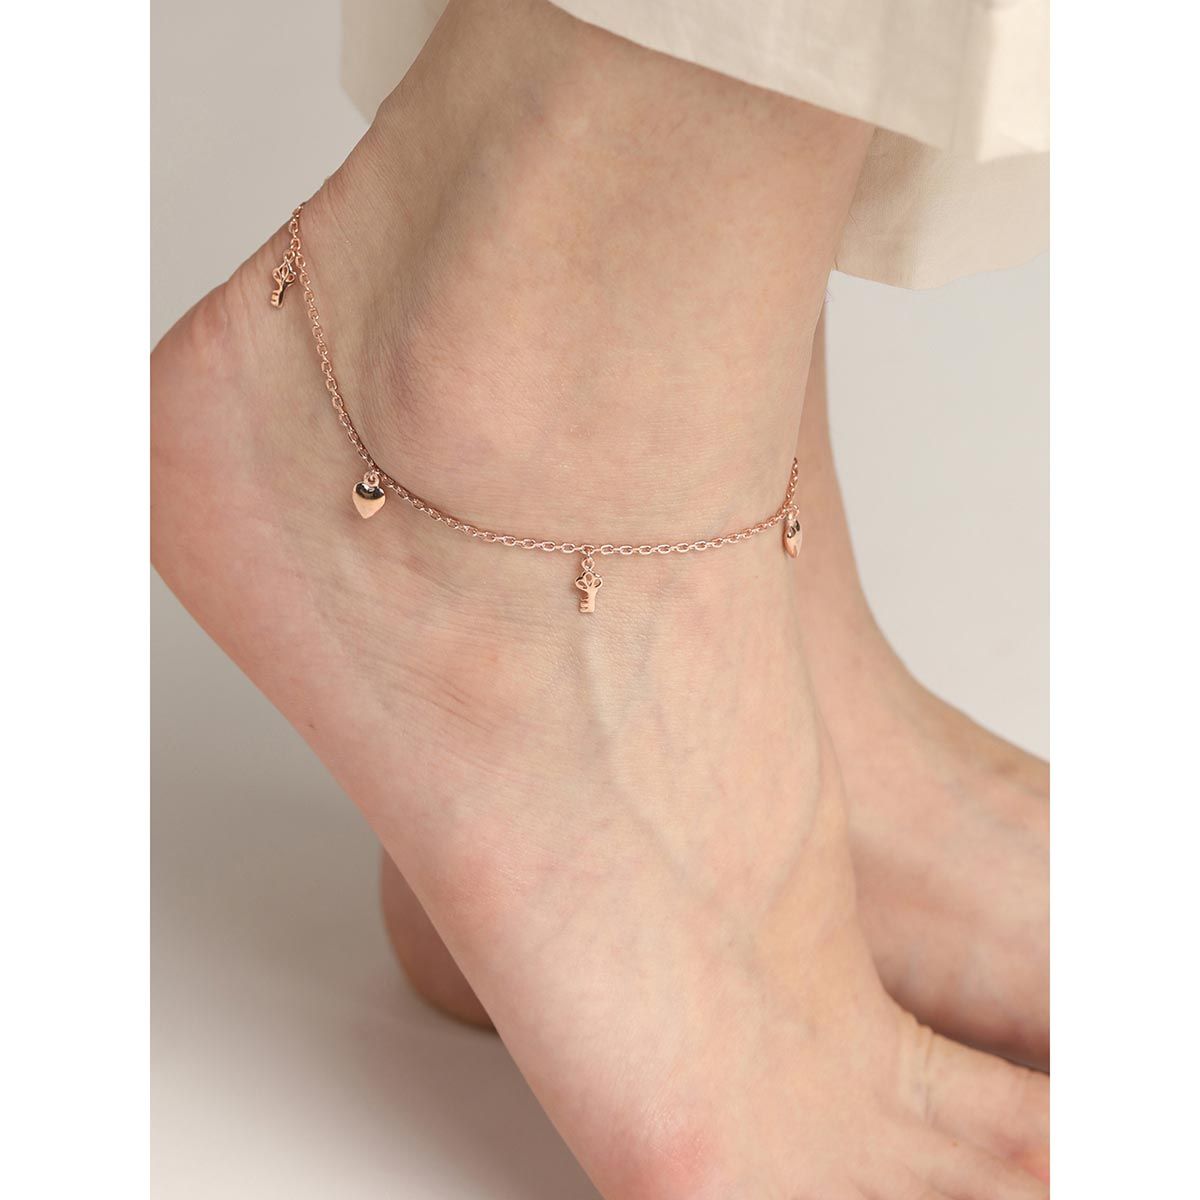 CLARA 925 Sterling Silver Flower Anklet Payal ( Single ) Adjustable Chain, Rose Gold Plated Gift for Women and Girls